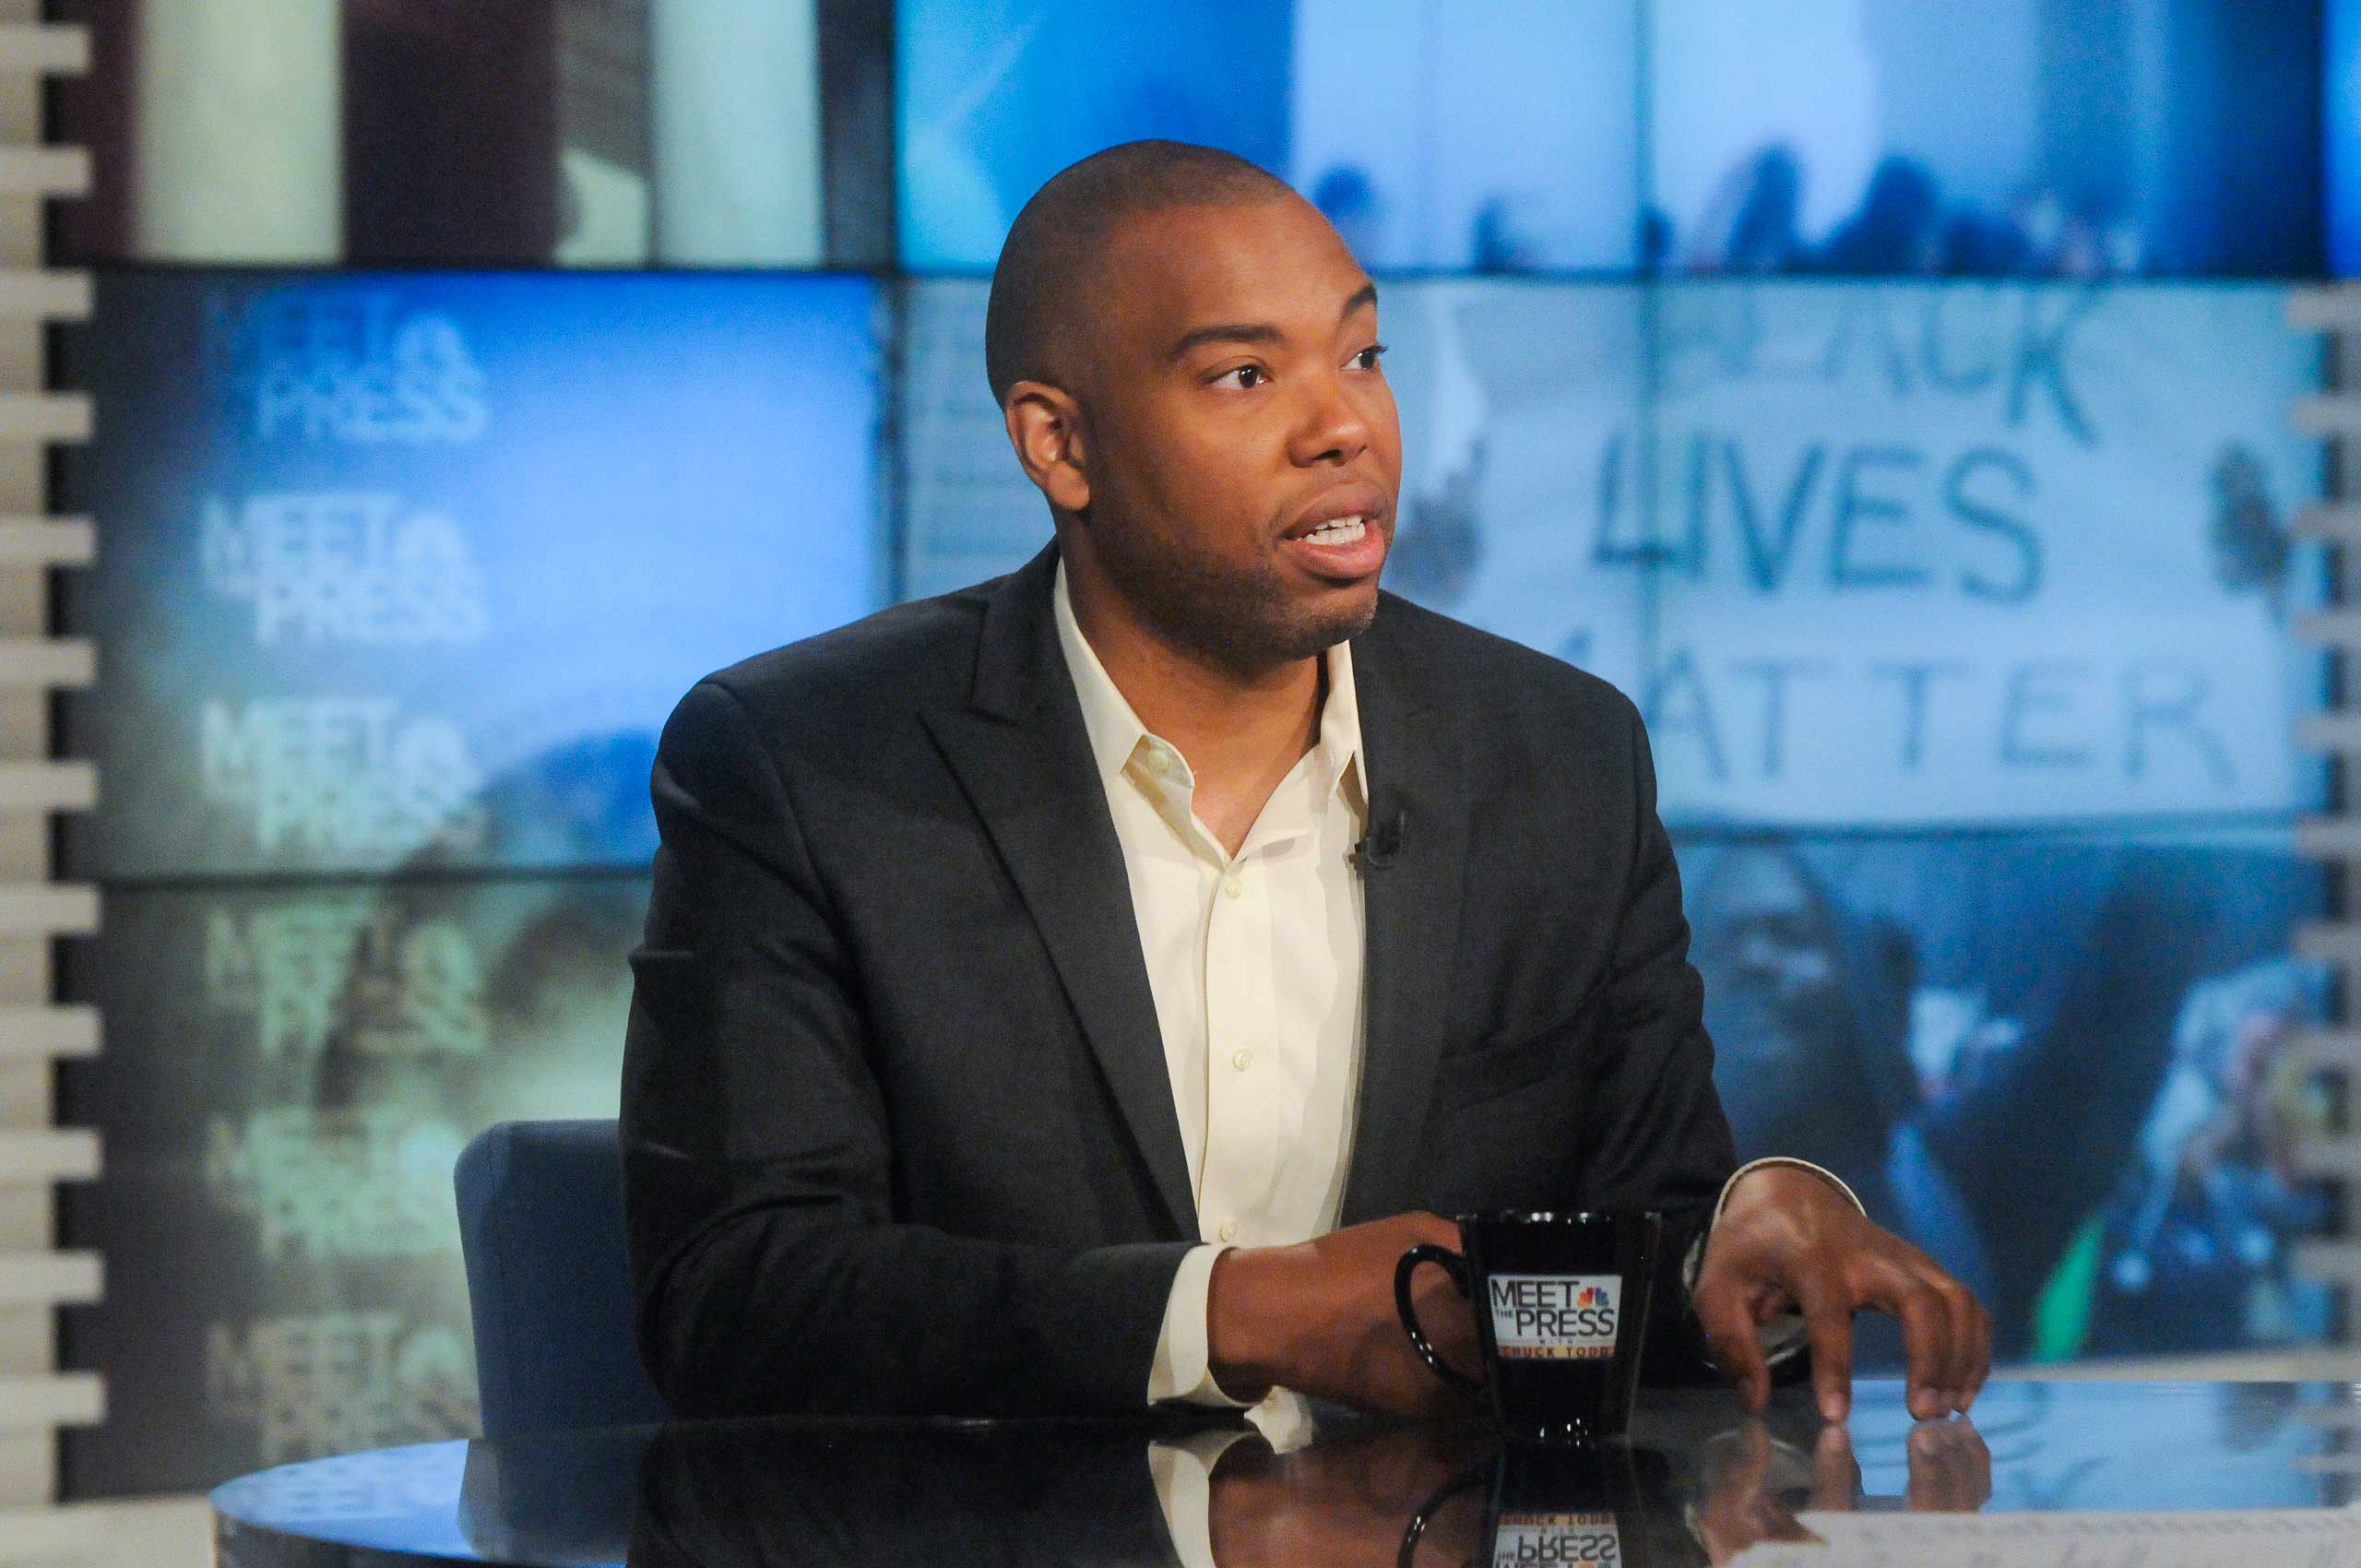 Ta-Nehisi Coates, National Correspondent for The Atlantic and author of "Between the World and Me" appears on "Meet the Press" in Washington, D.C., July 5, 2015. (NBCU Photo Bank—Getty Images)